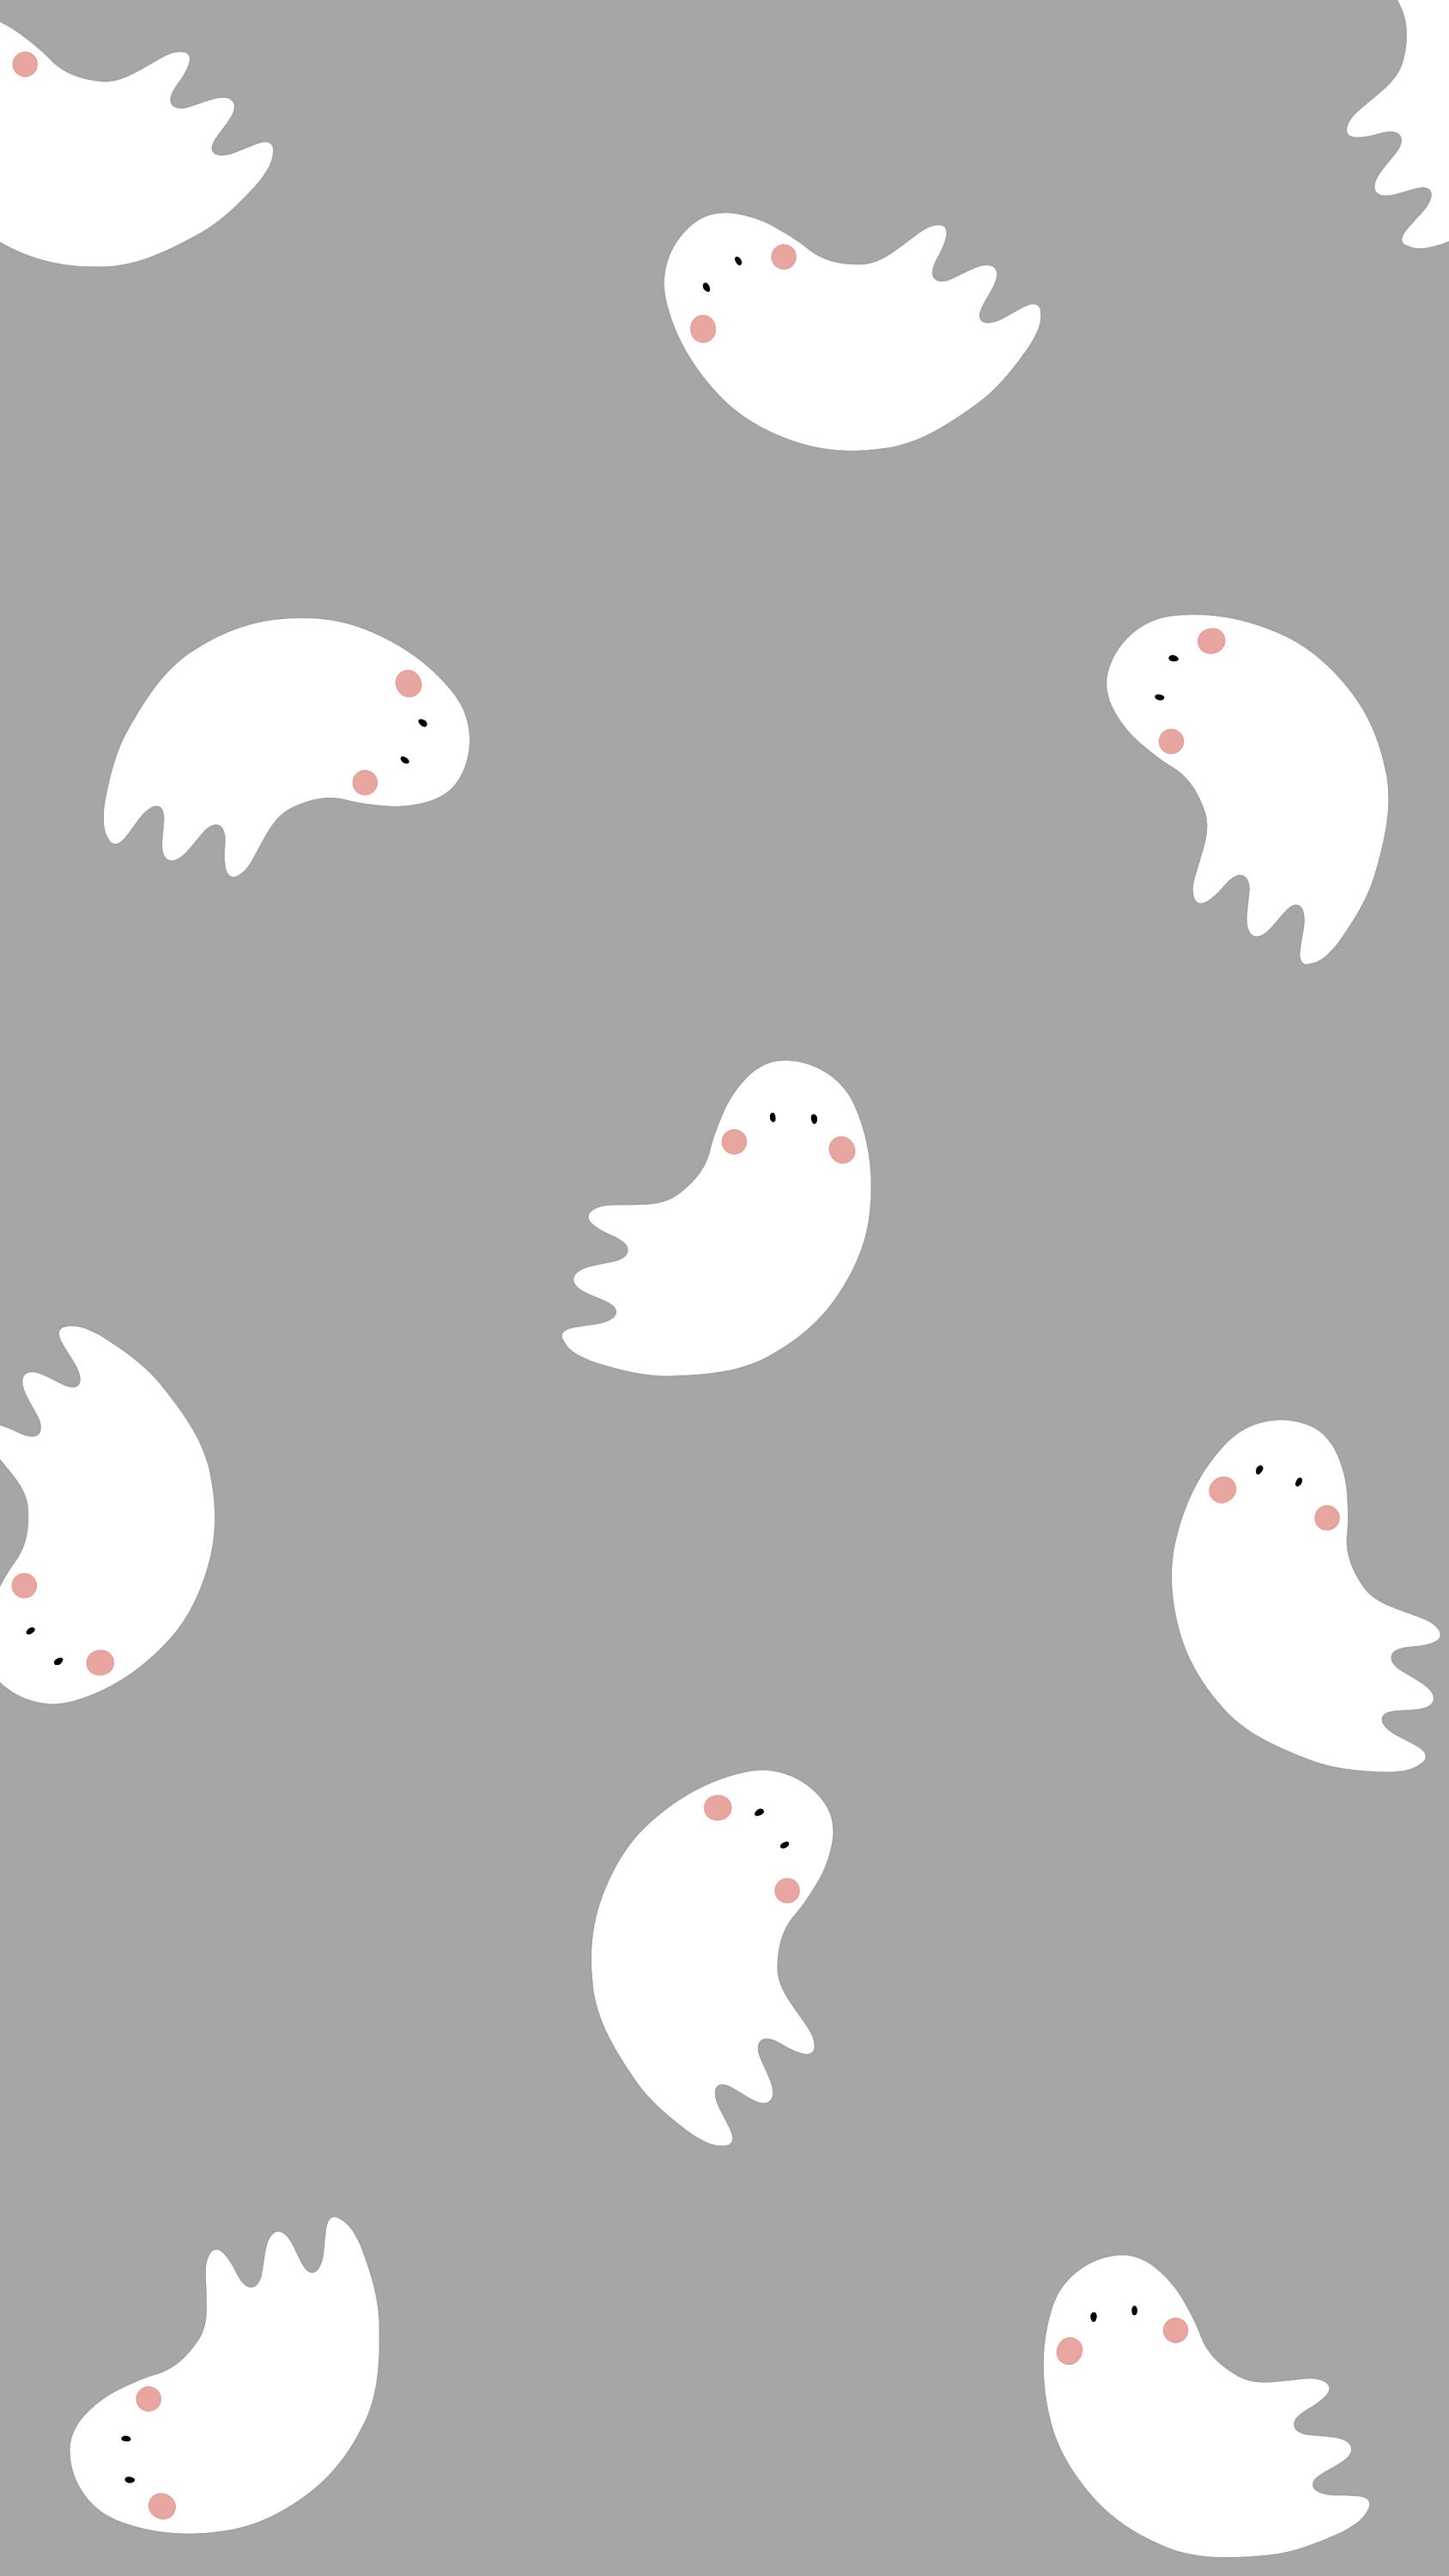 100+] Cute Ghost Wallpapers | Wallpapers.com